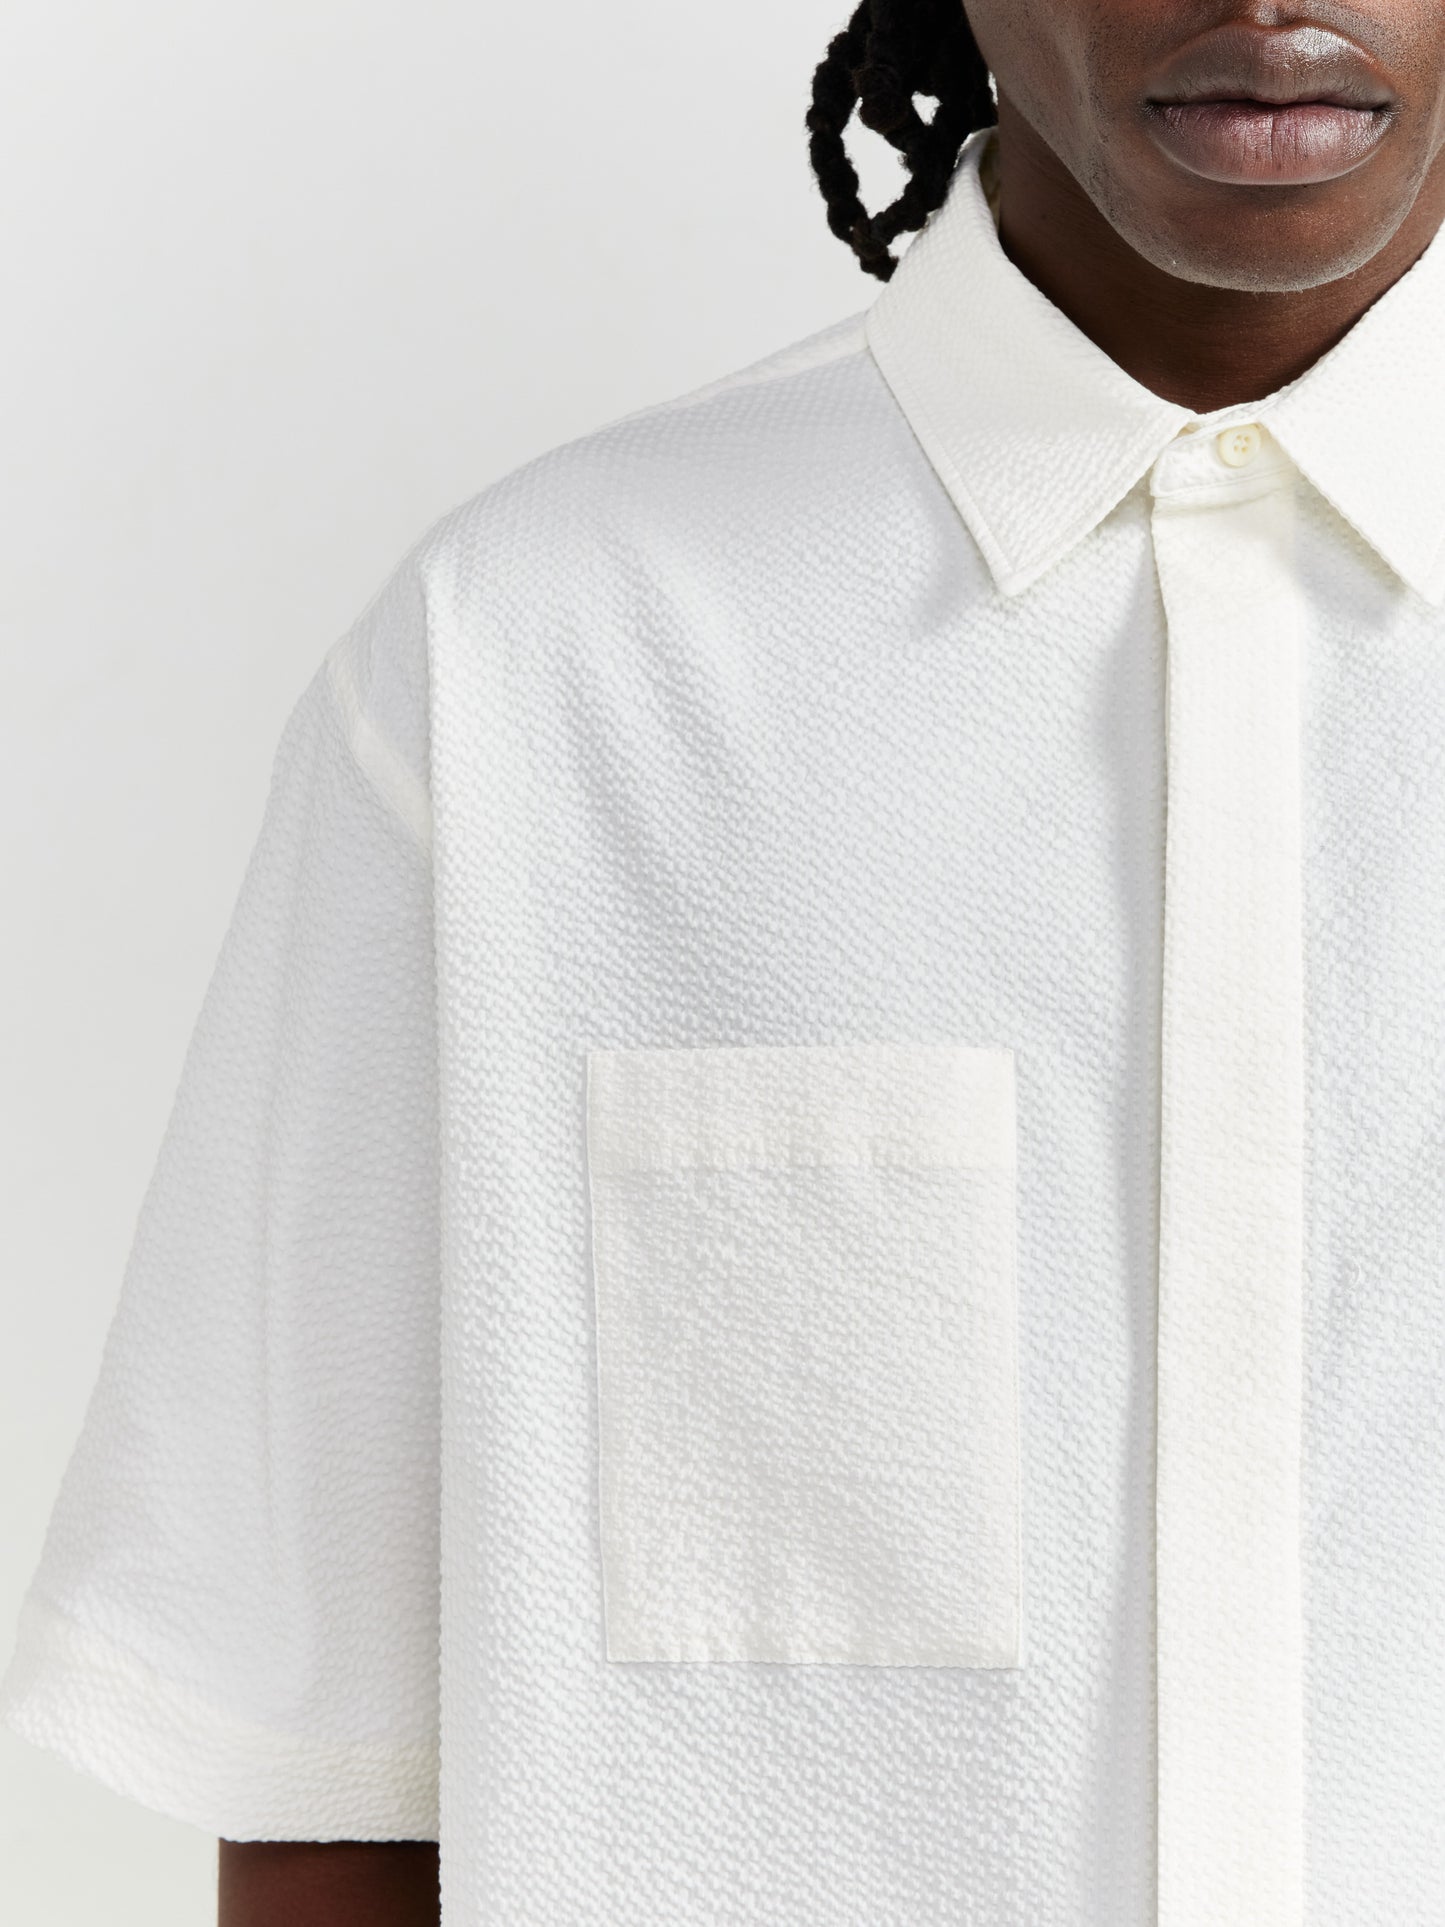 OFFWHITE SHORT SLEEVE BUTTON UP